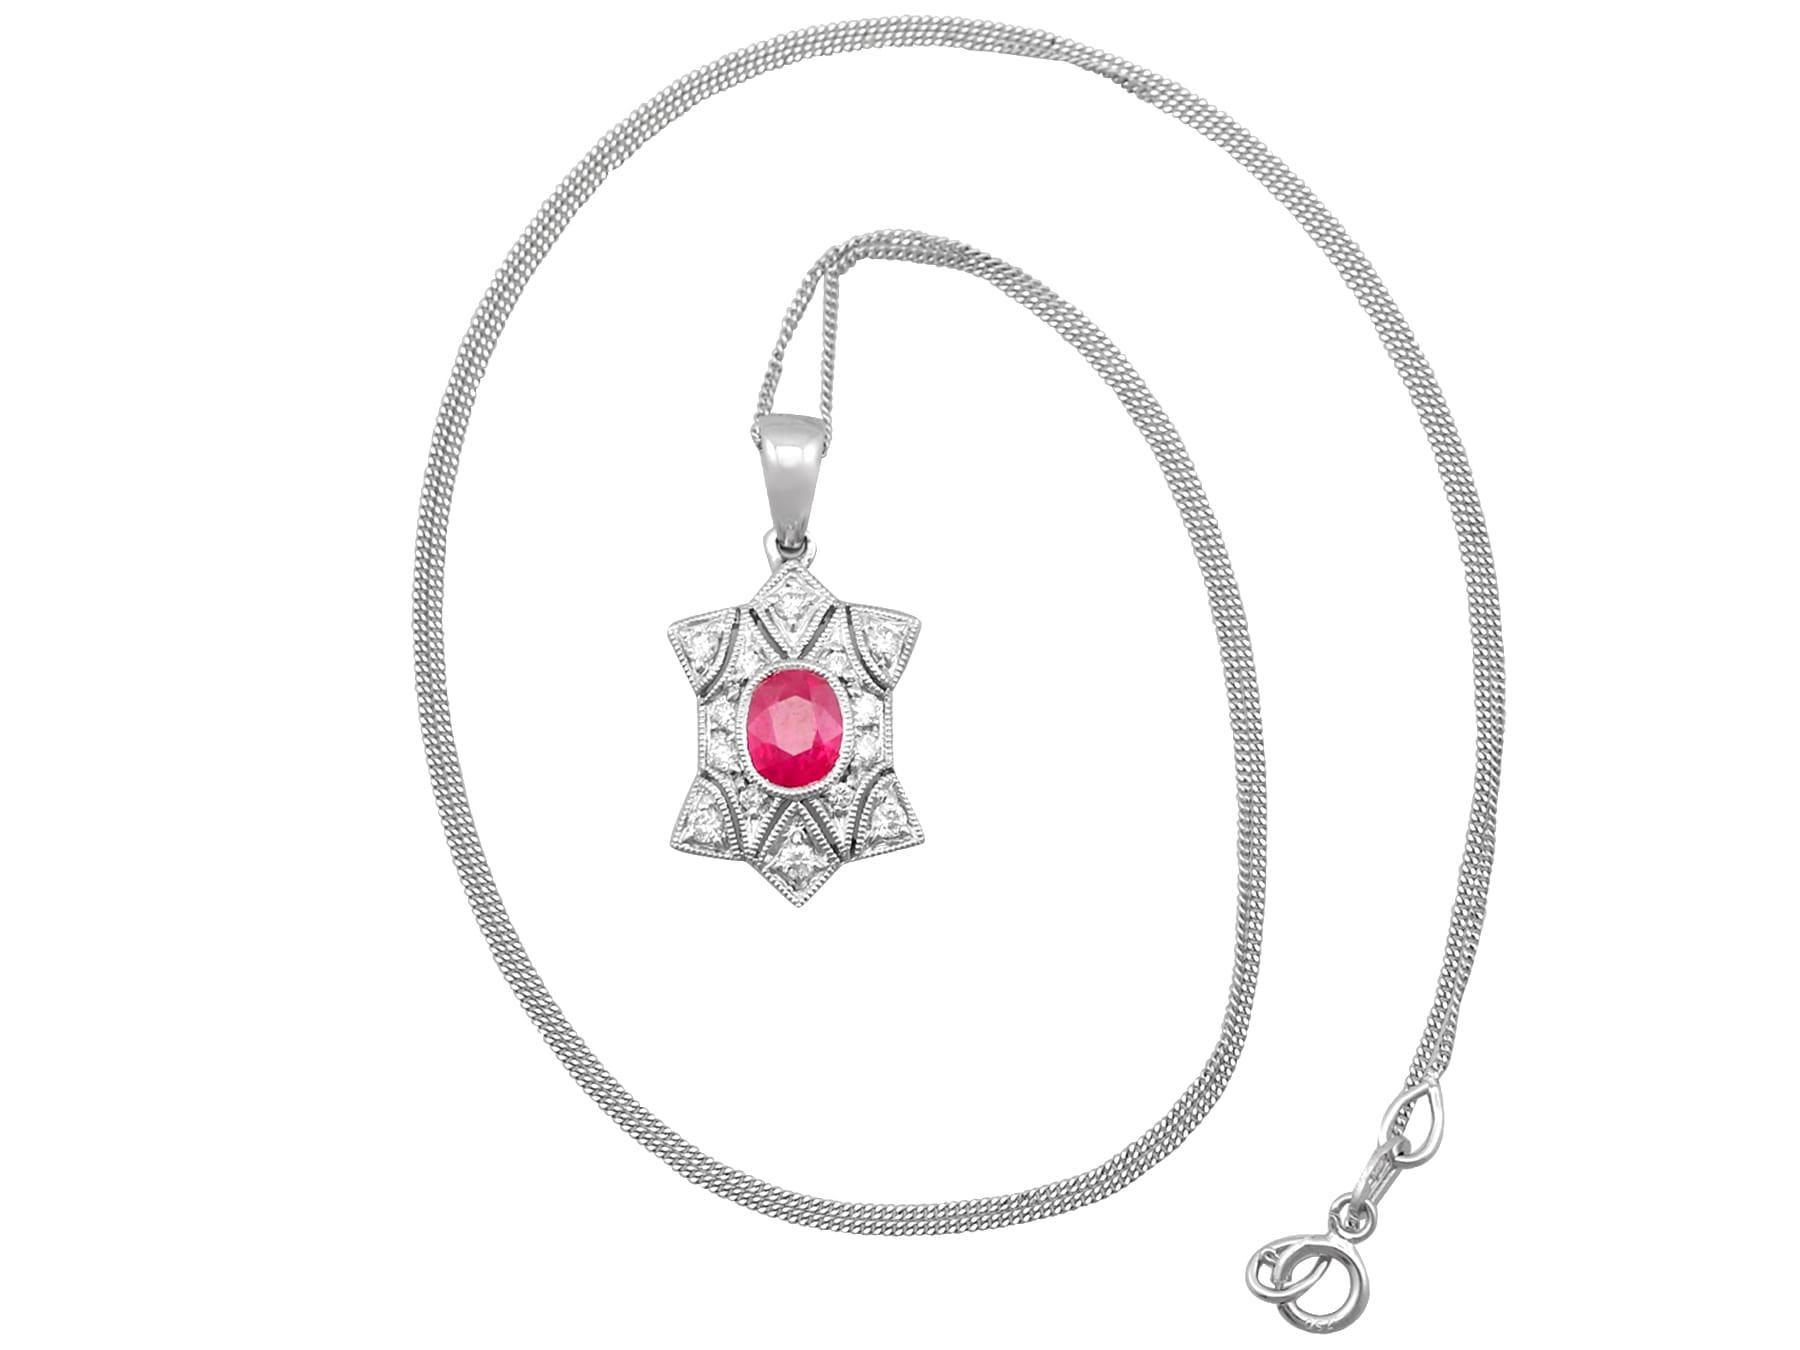 A fine and impressive contemporary 0.78 carat ruby and 0.28 carat diamond, 18 karat white gold pendant; part of our diverse contemporary jewelry collection.

This impressive contemporary ruby and diamond pendant has been crafted in 18 karat white